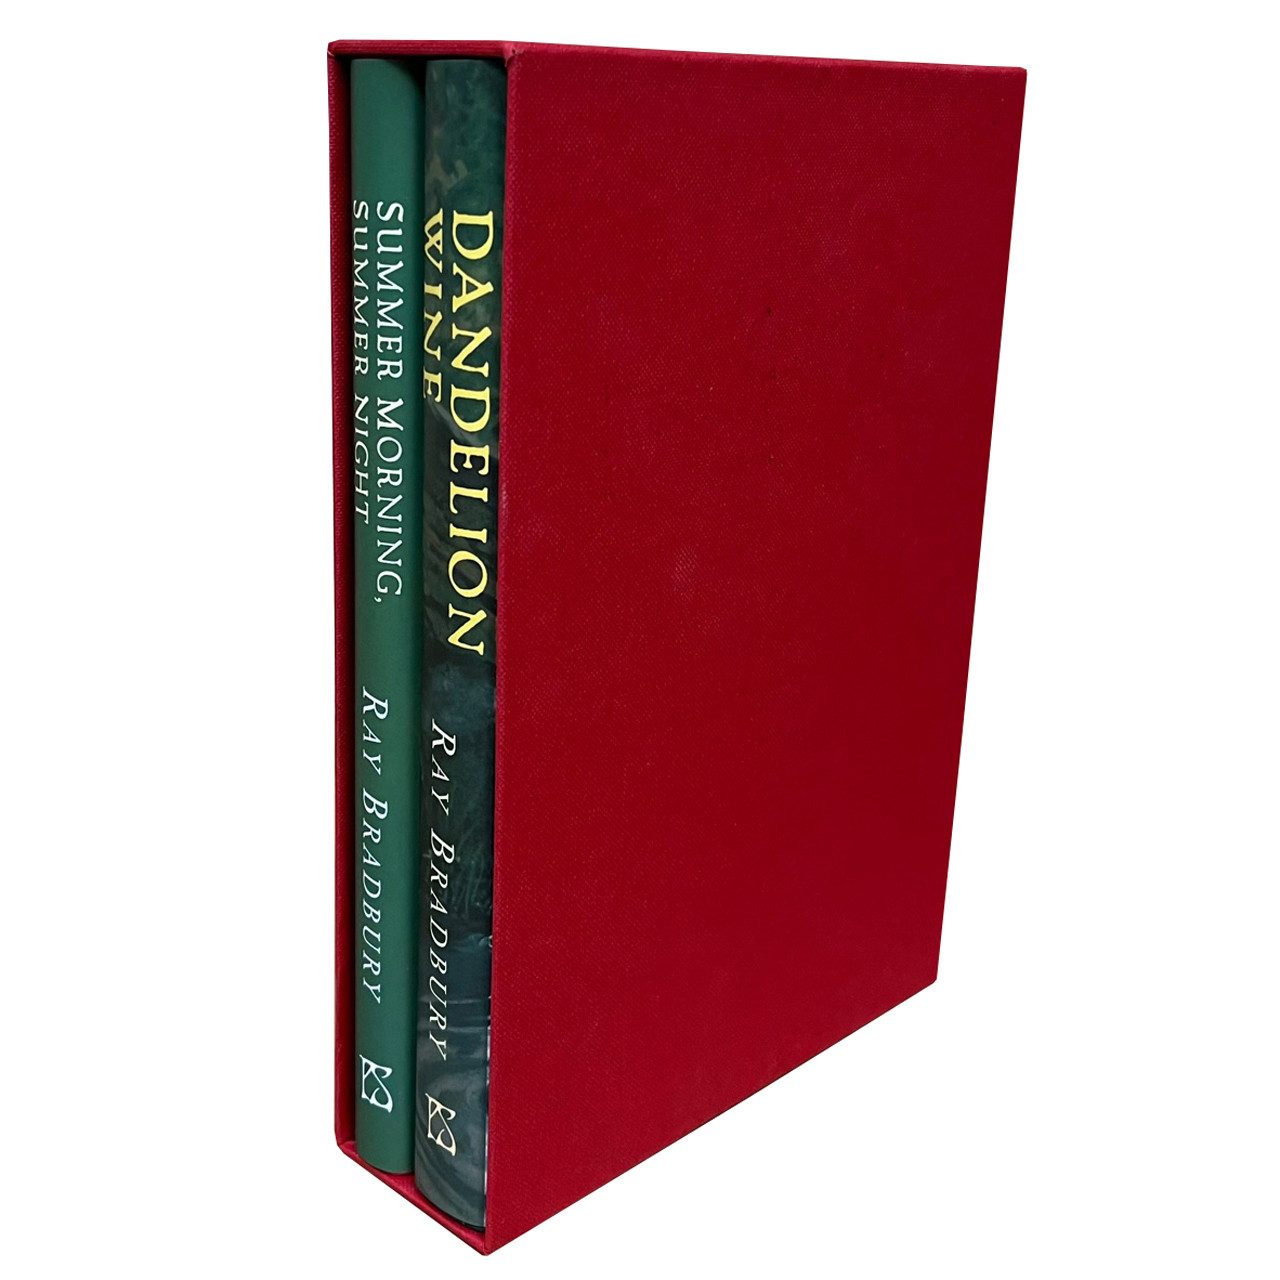 Ray Bradbury "Dandelion Wine: 50th Anniversary Edition" & "Summer Morning, Summer Night" Signed Limited Edition No. 84 of 100 (signed by Stephen King)